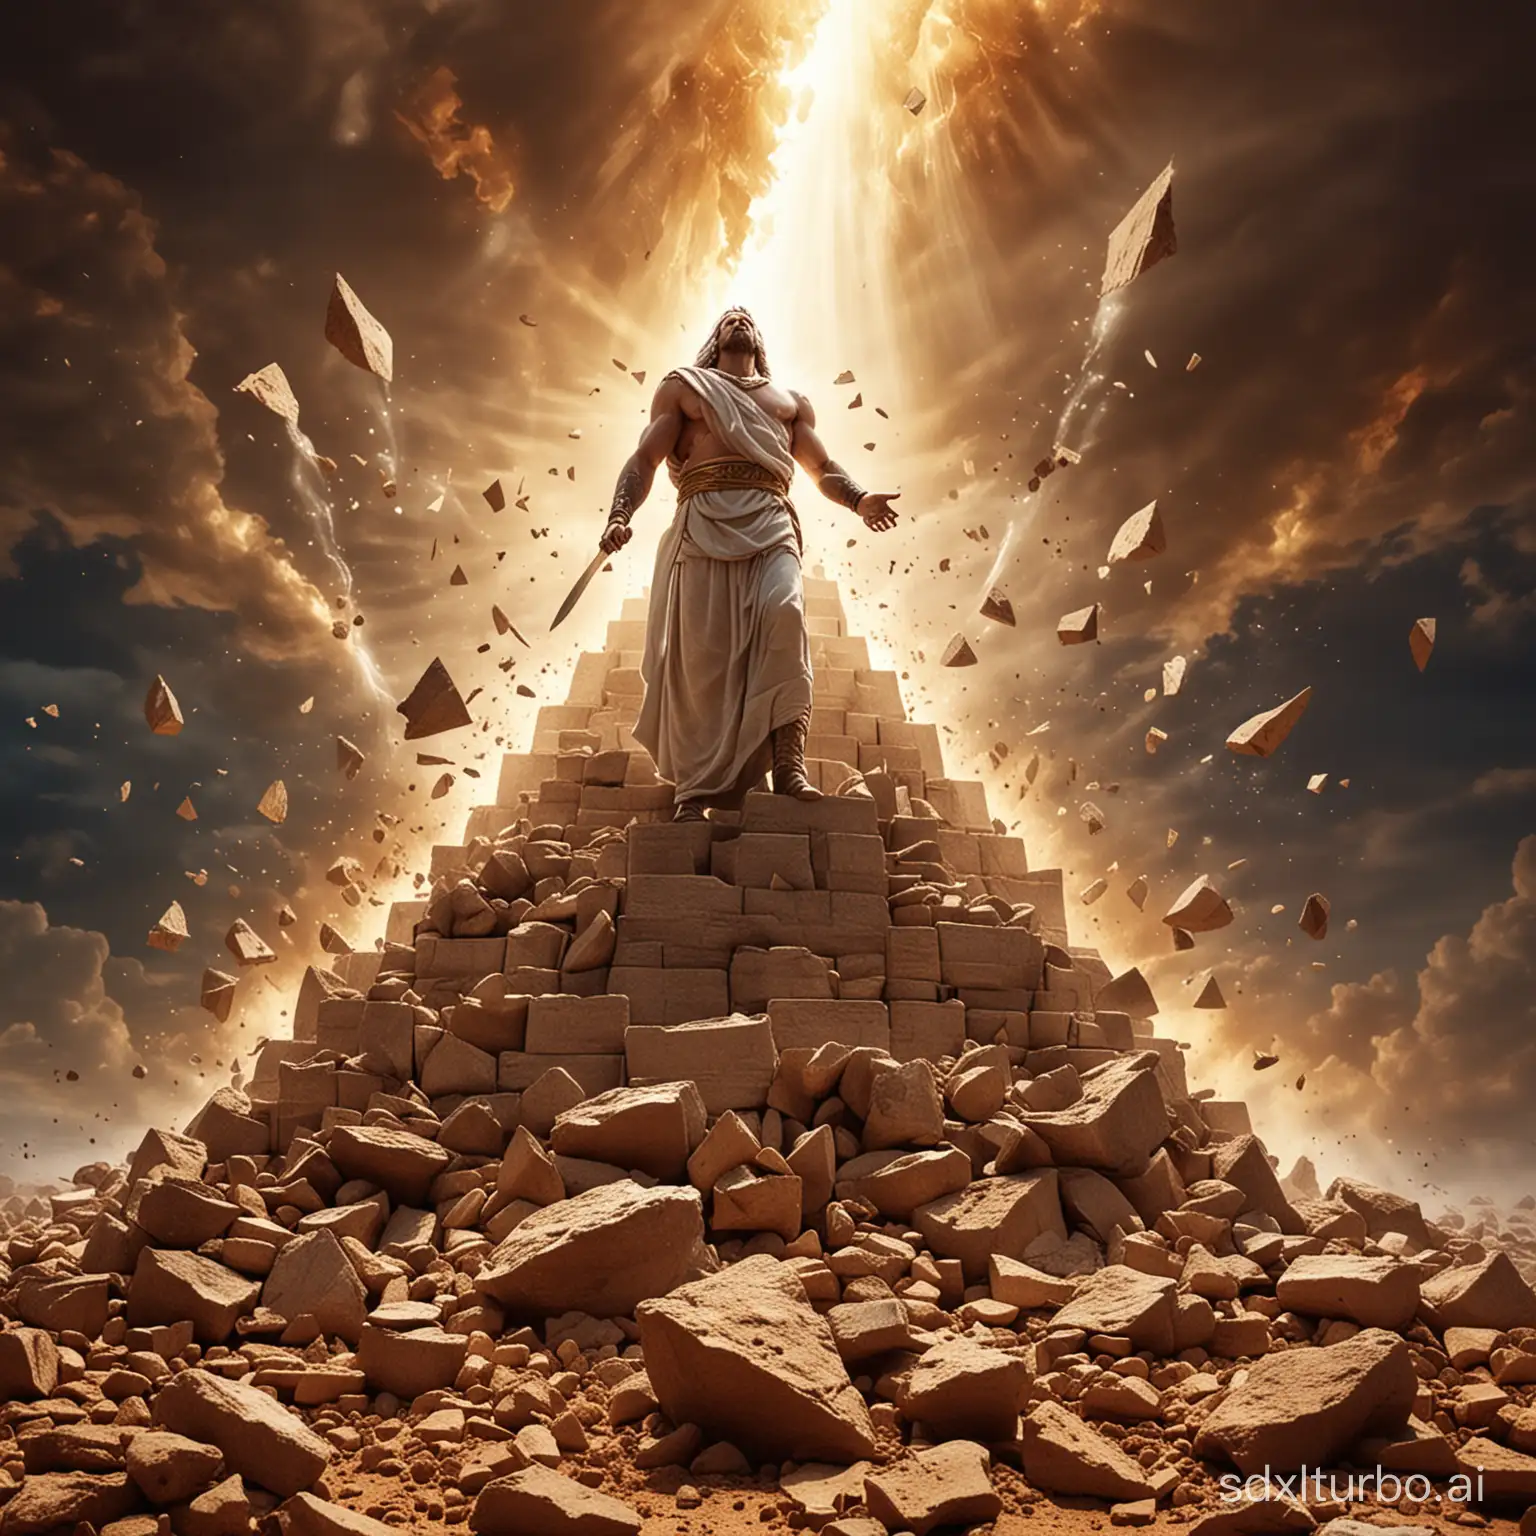 god coming down from heaven smashing evil pyramid into pieces